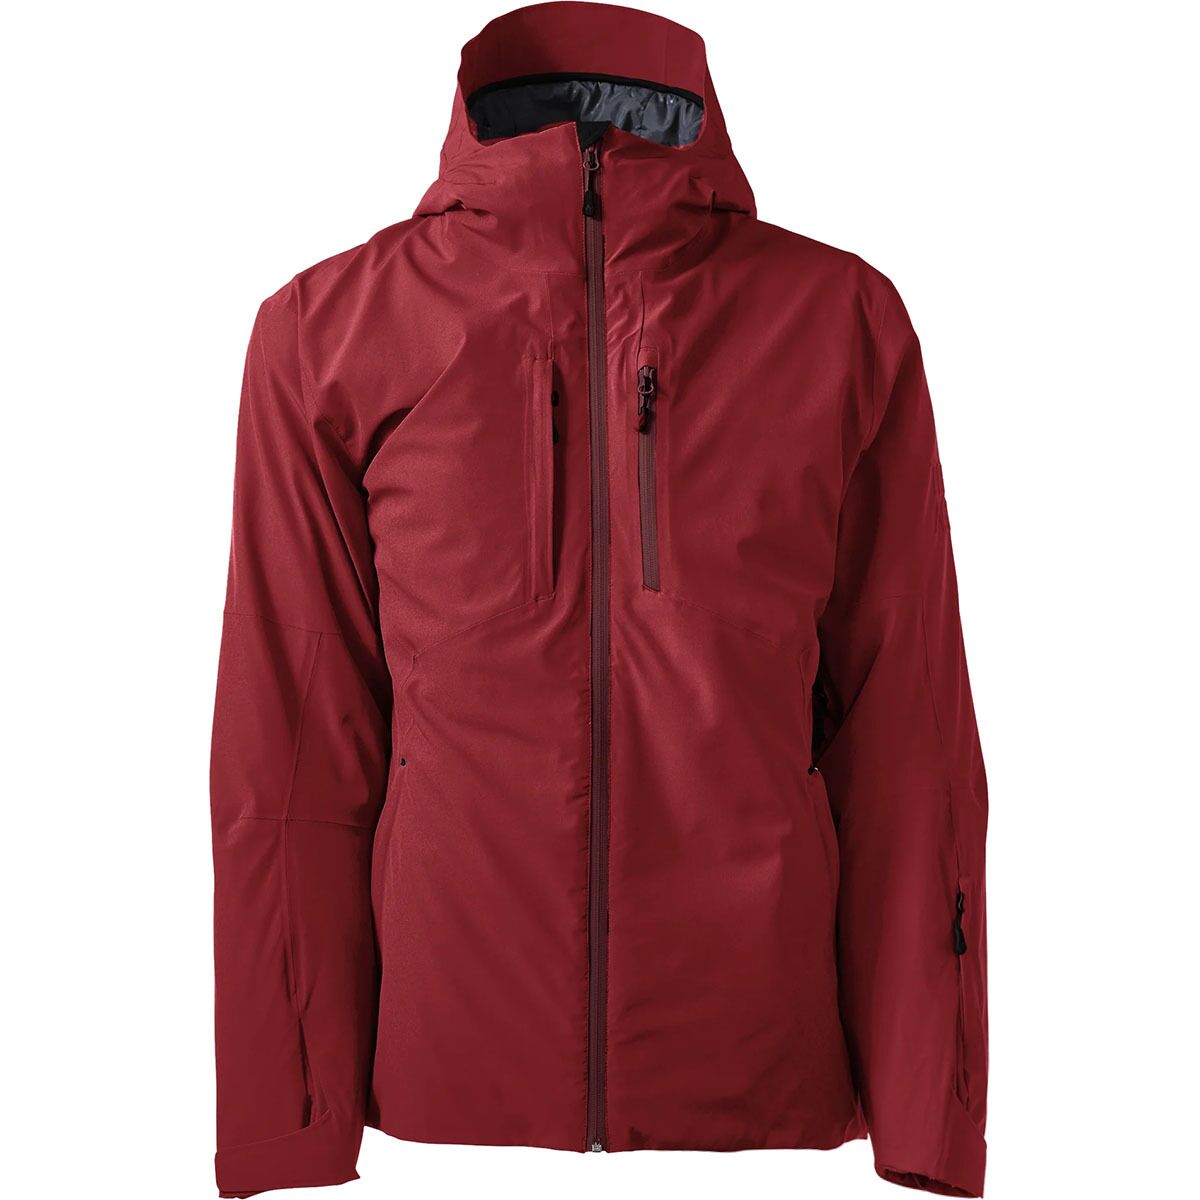 Terracea Helicon 2L Insulated Jacket - Men's Cab Red